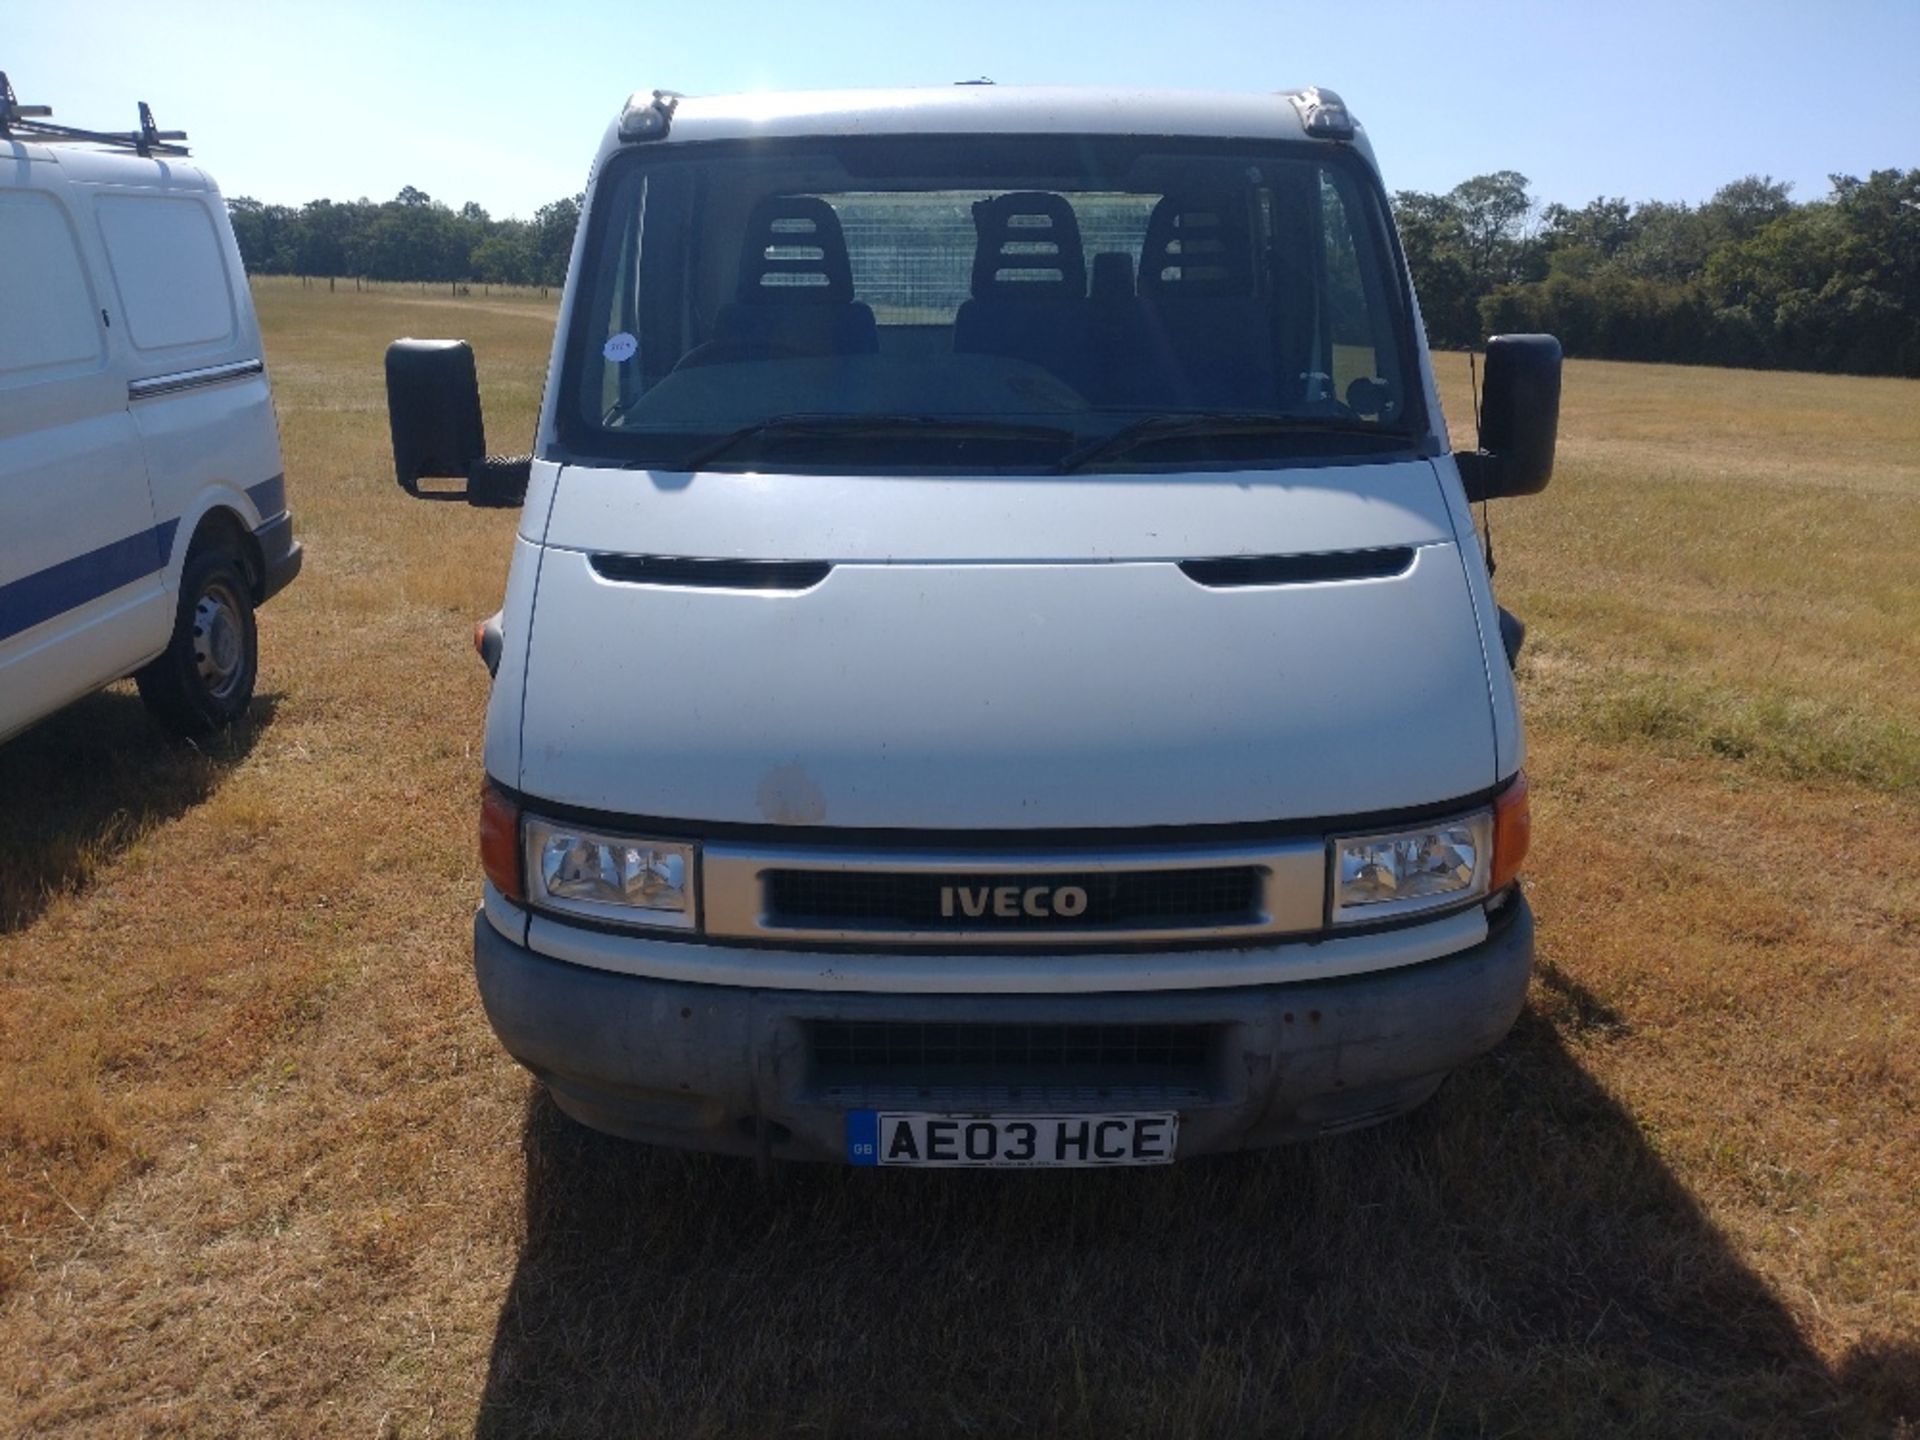 Iveco Daily AE03 HCE van, - Image 2 of 5